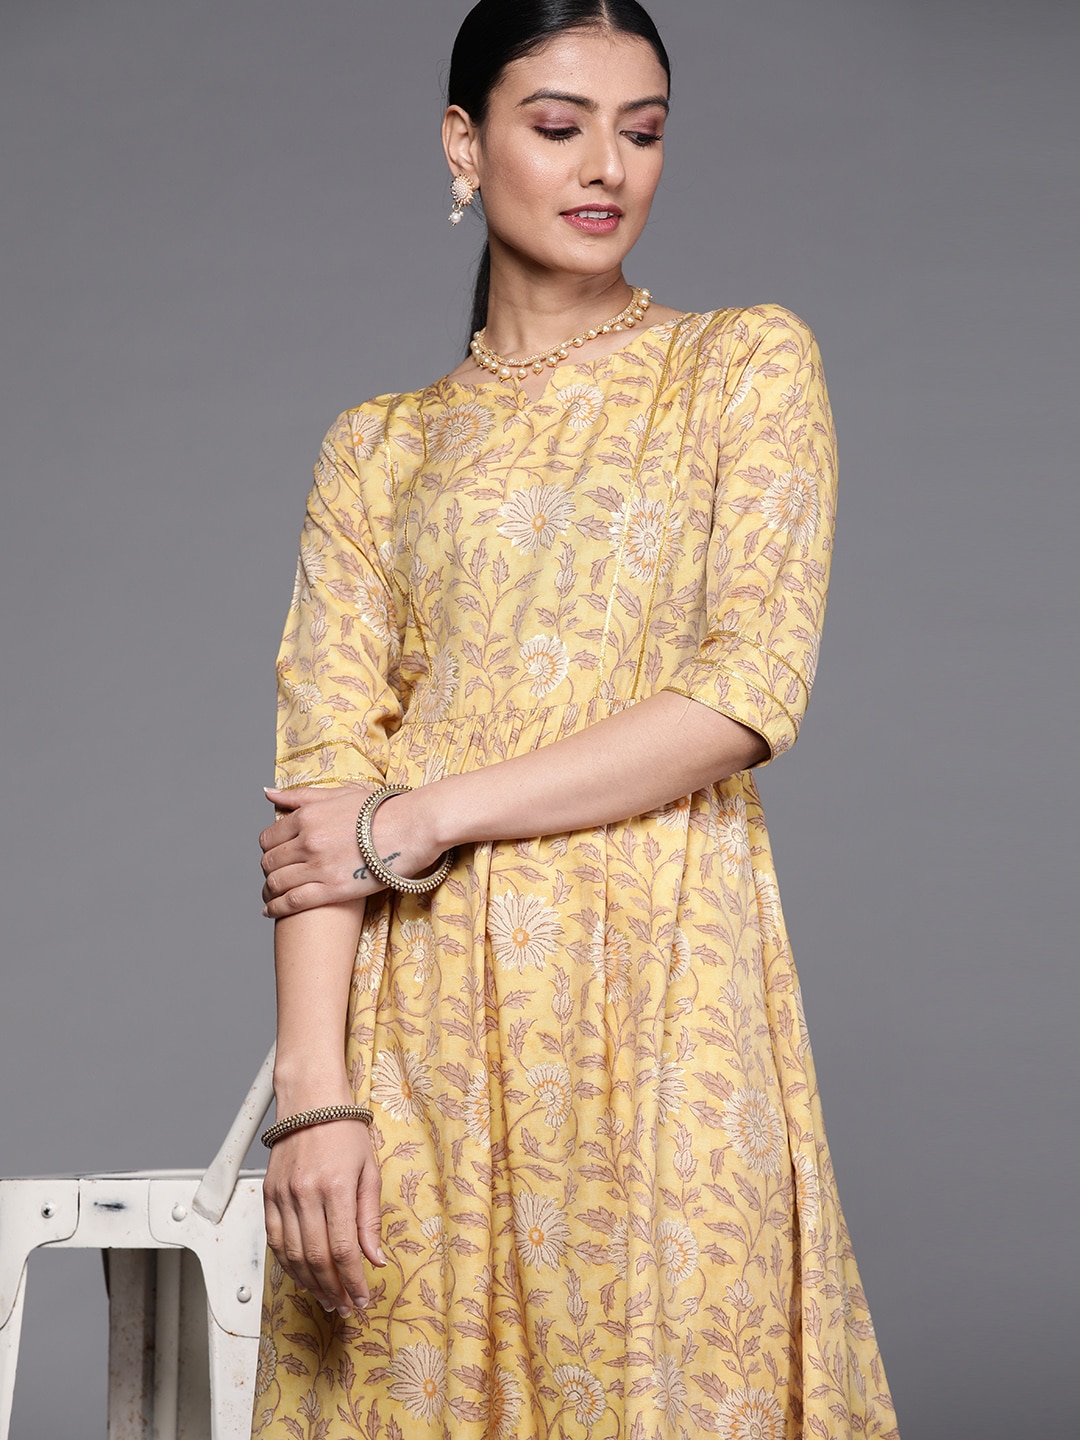 Libas Mustard Yellow & Off White Floral Printed A-Line Midi Dress Price in India